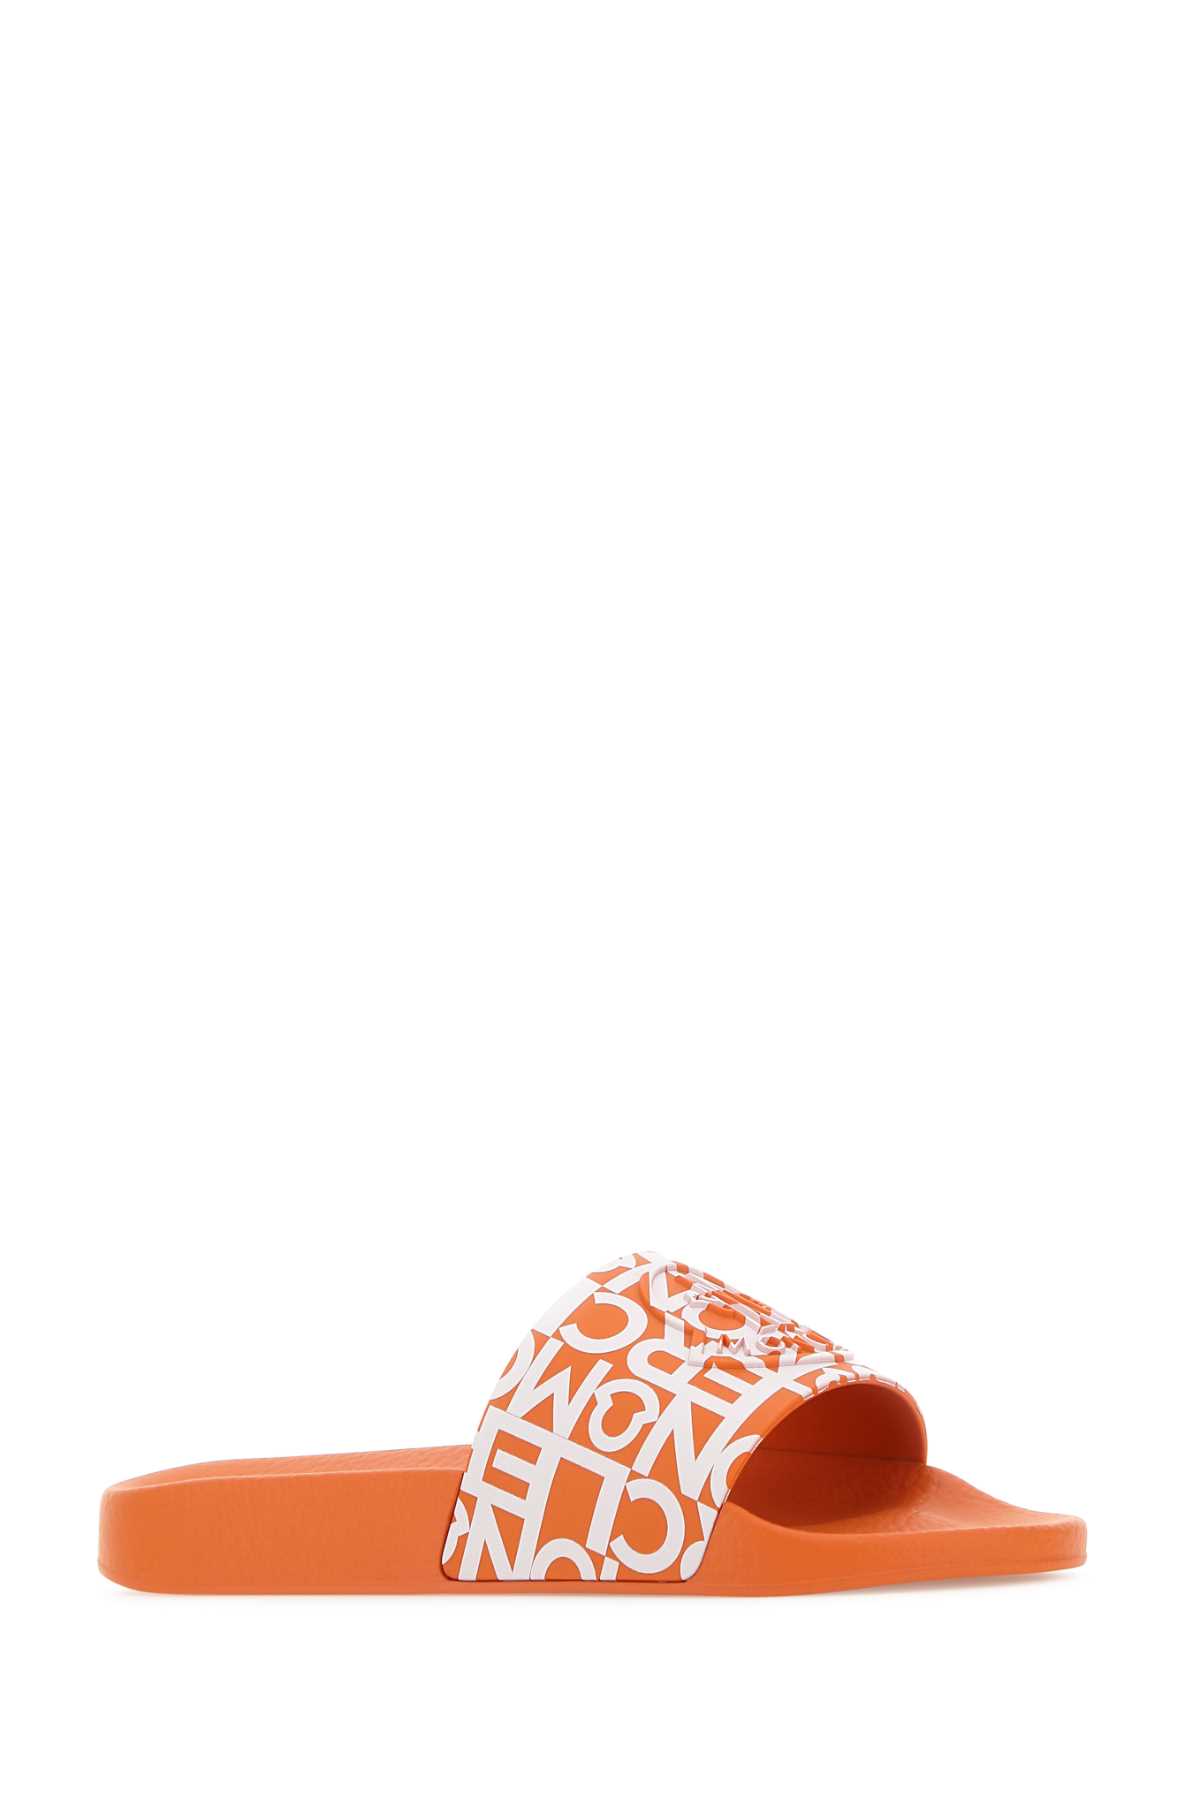 Moncler Printed Rubber Jeanne Slippers In Orange